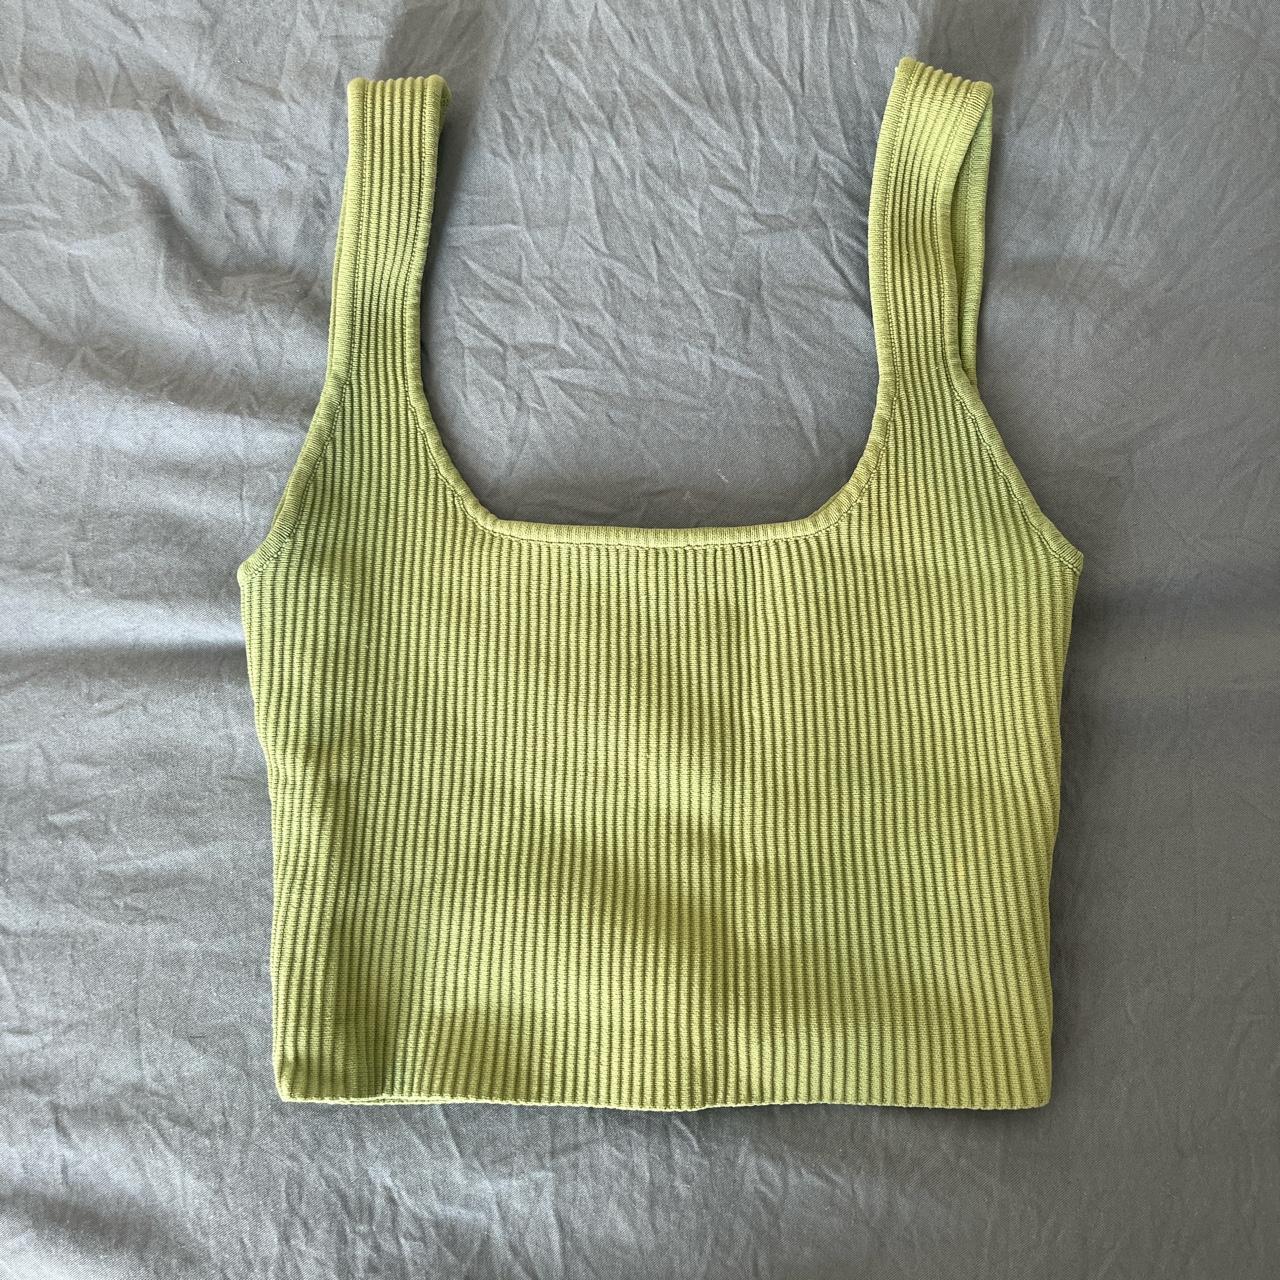 Glassons green square neck stretchy top - Depop